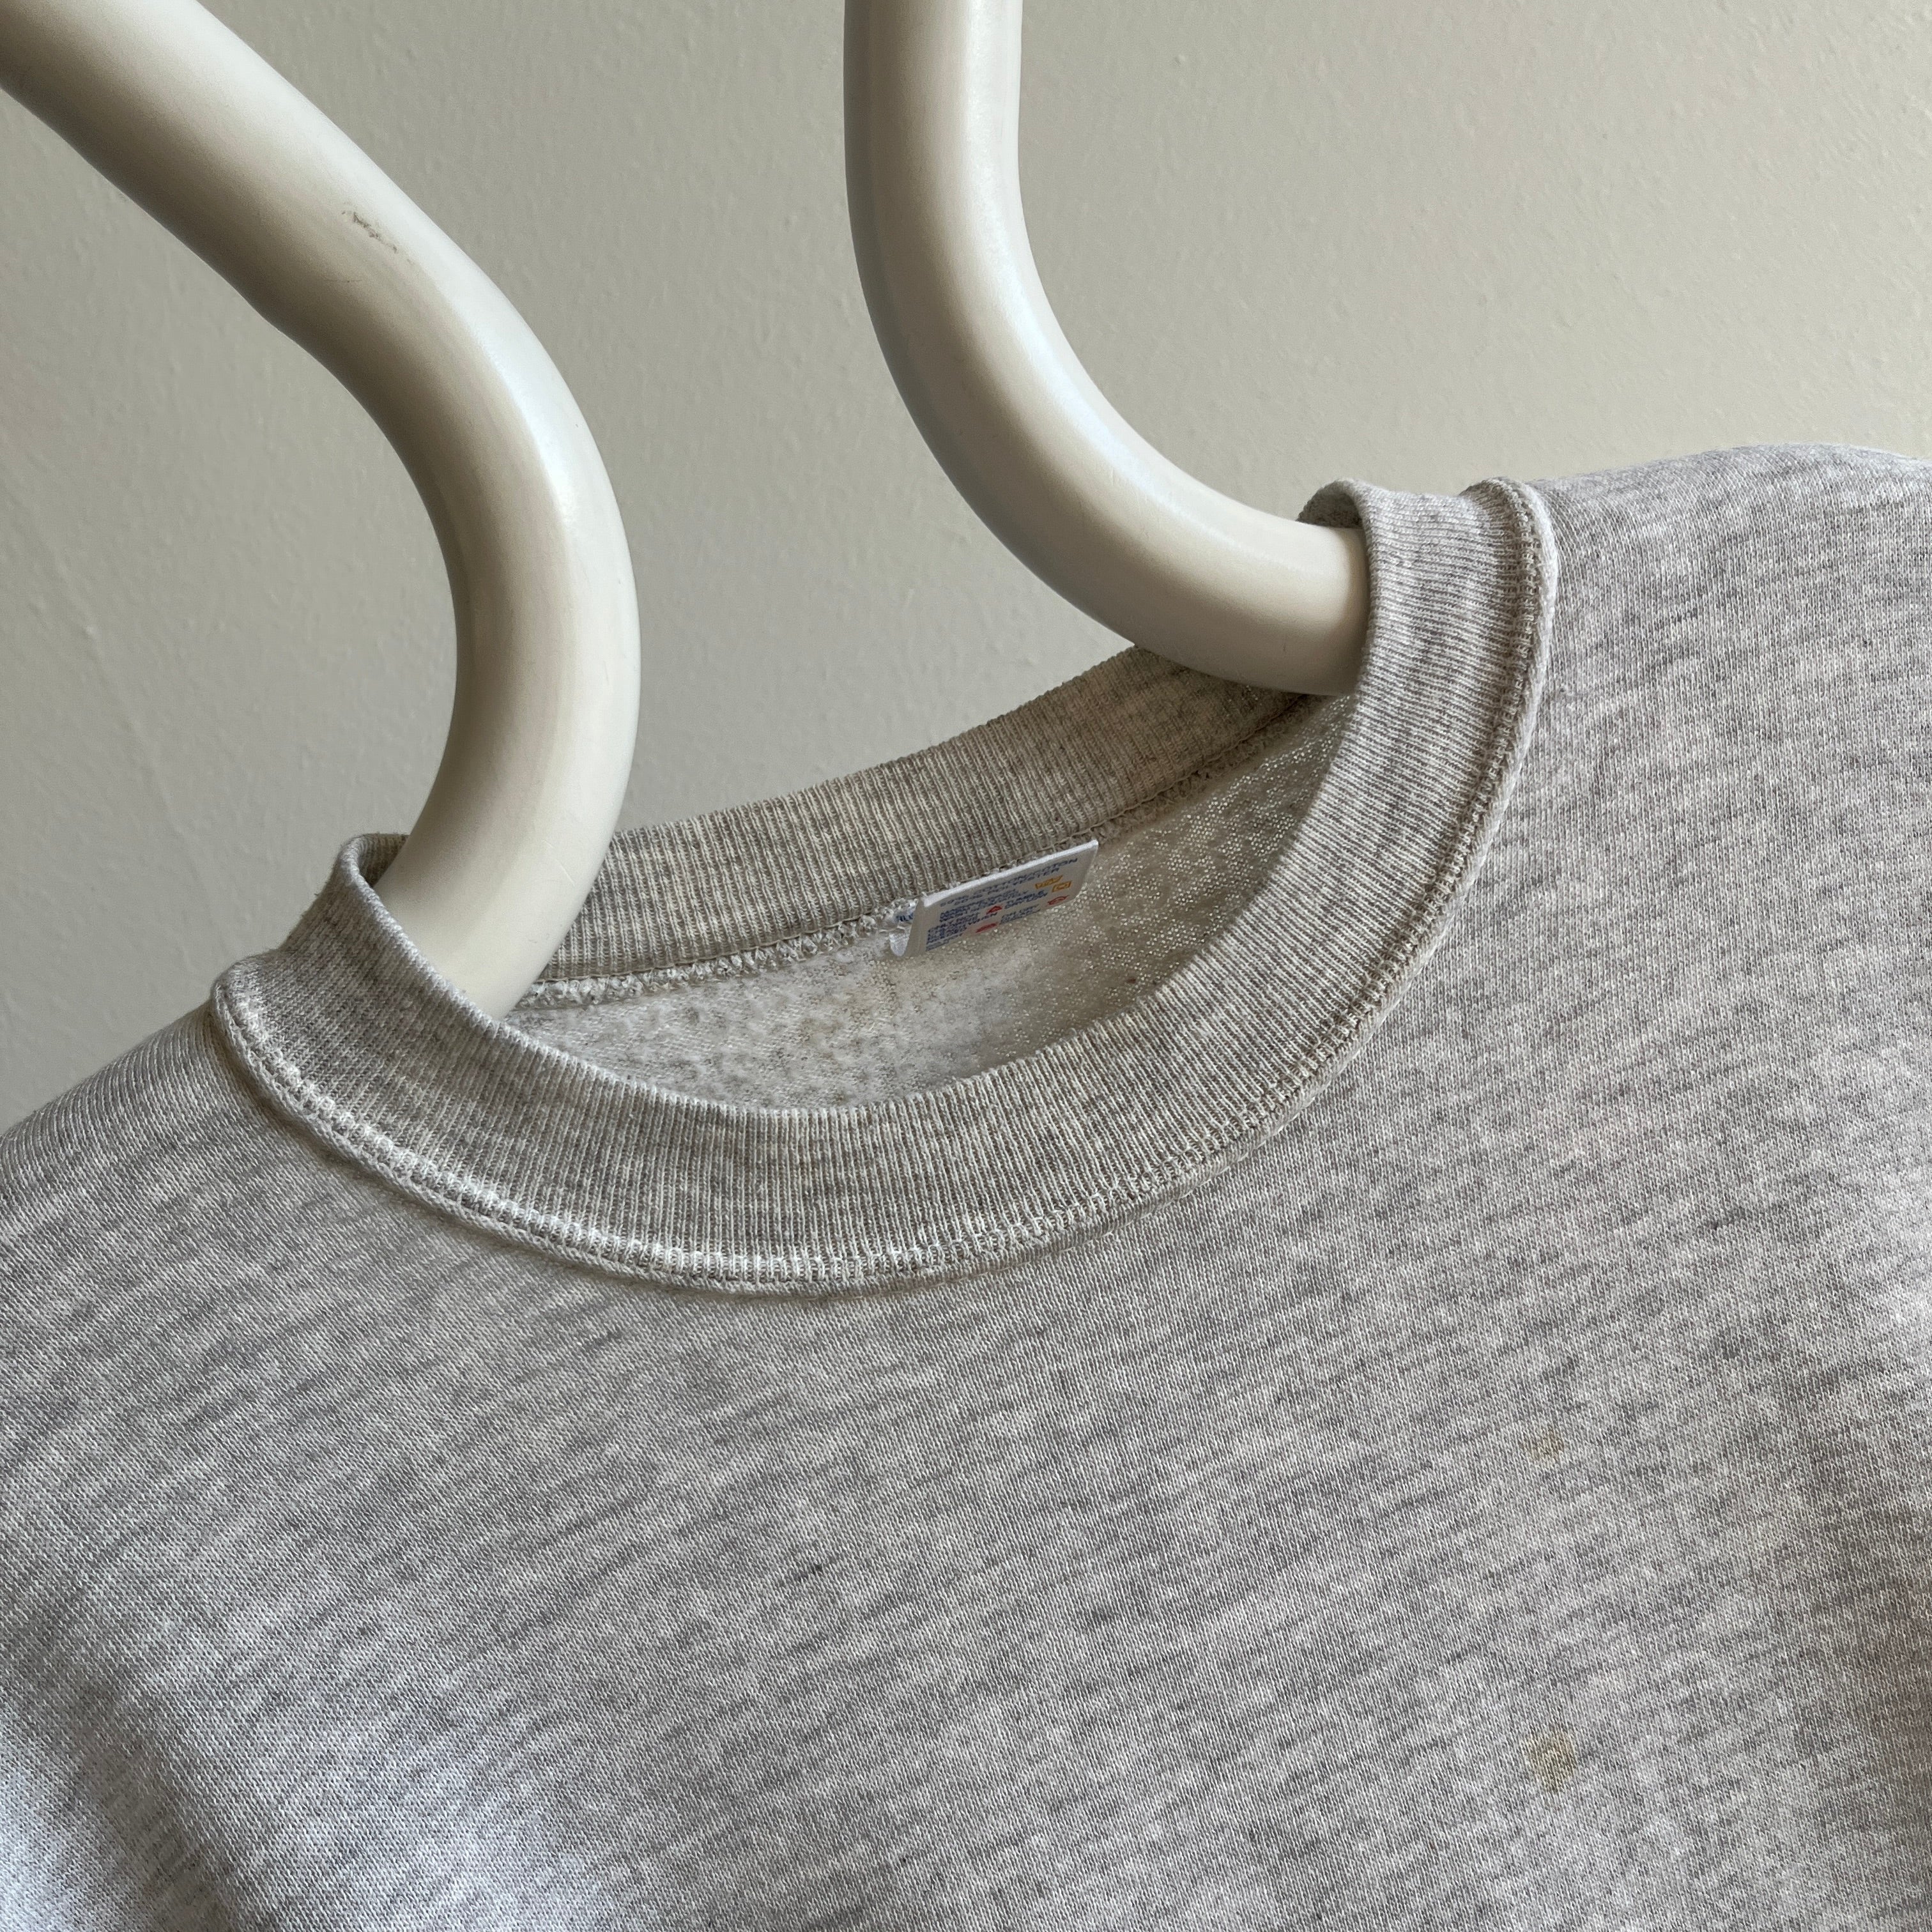 1980s Paper Thin Tattered, Torn, Worn, Stained Blank Gray Sweatshirt